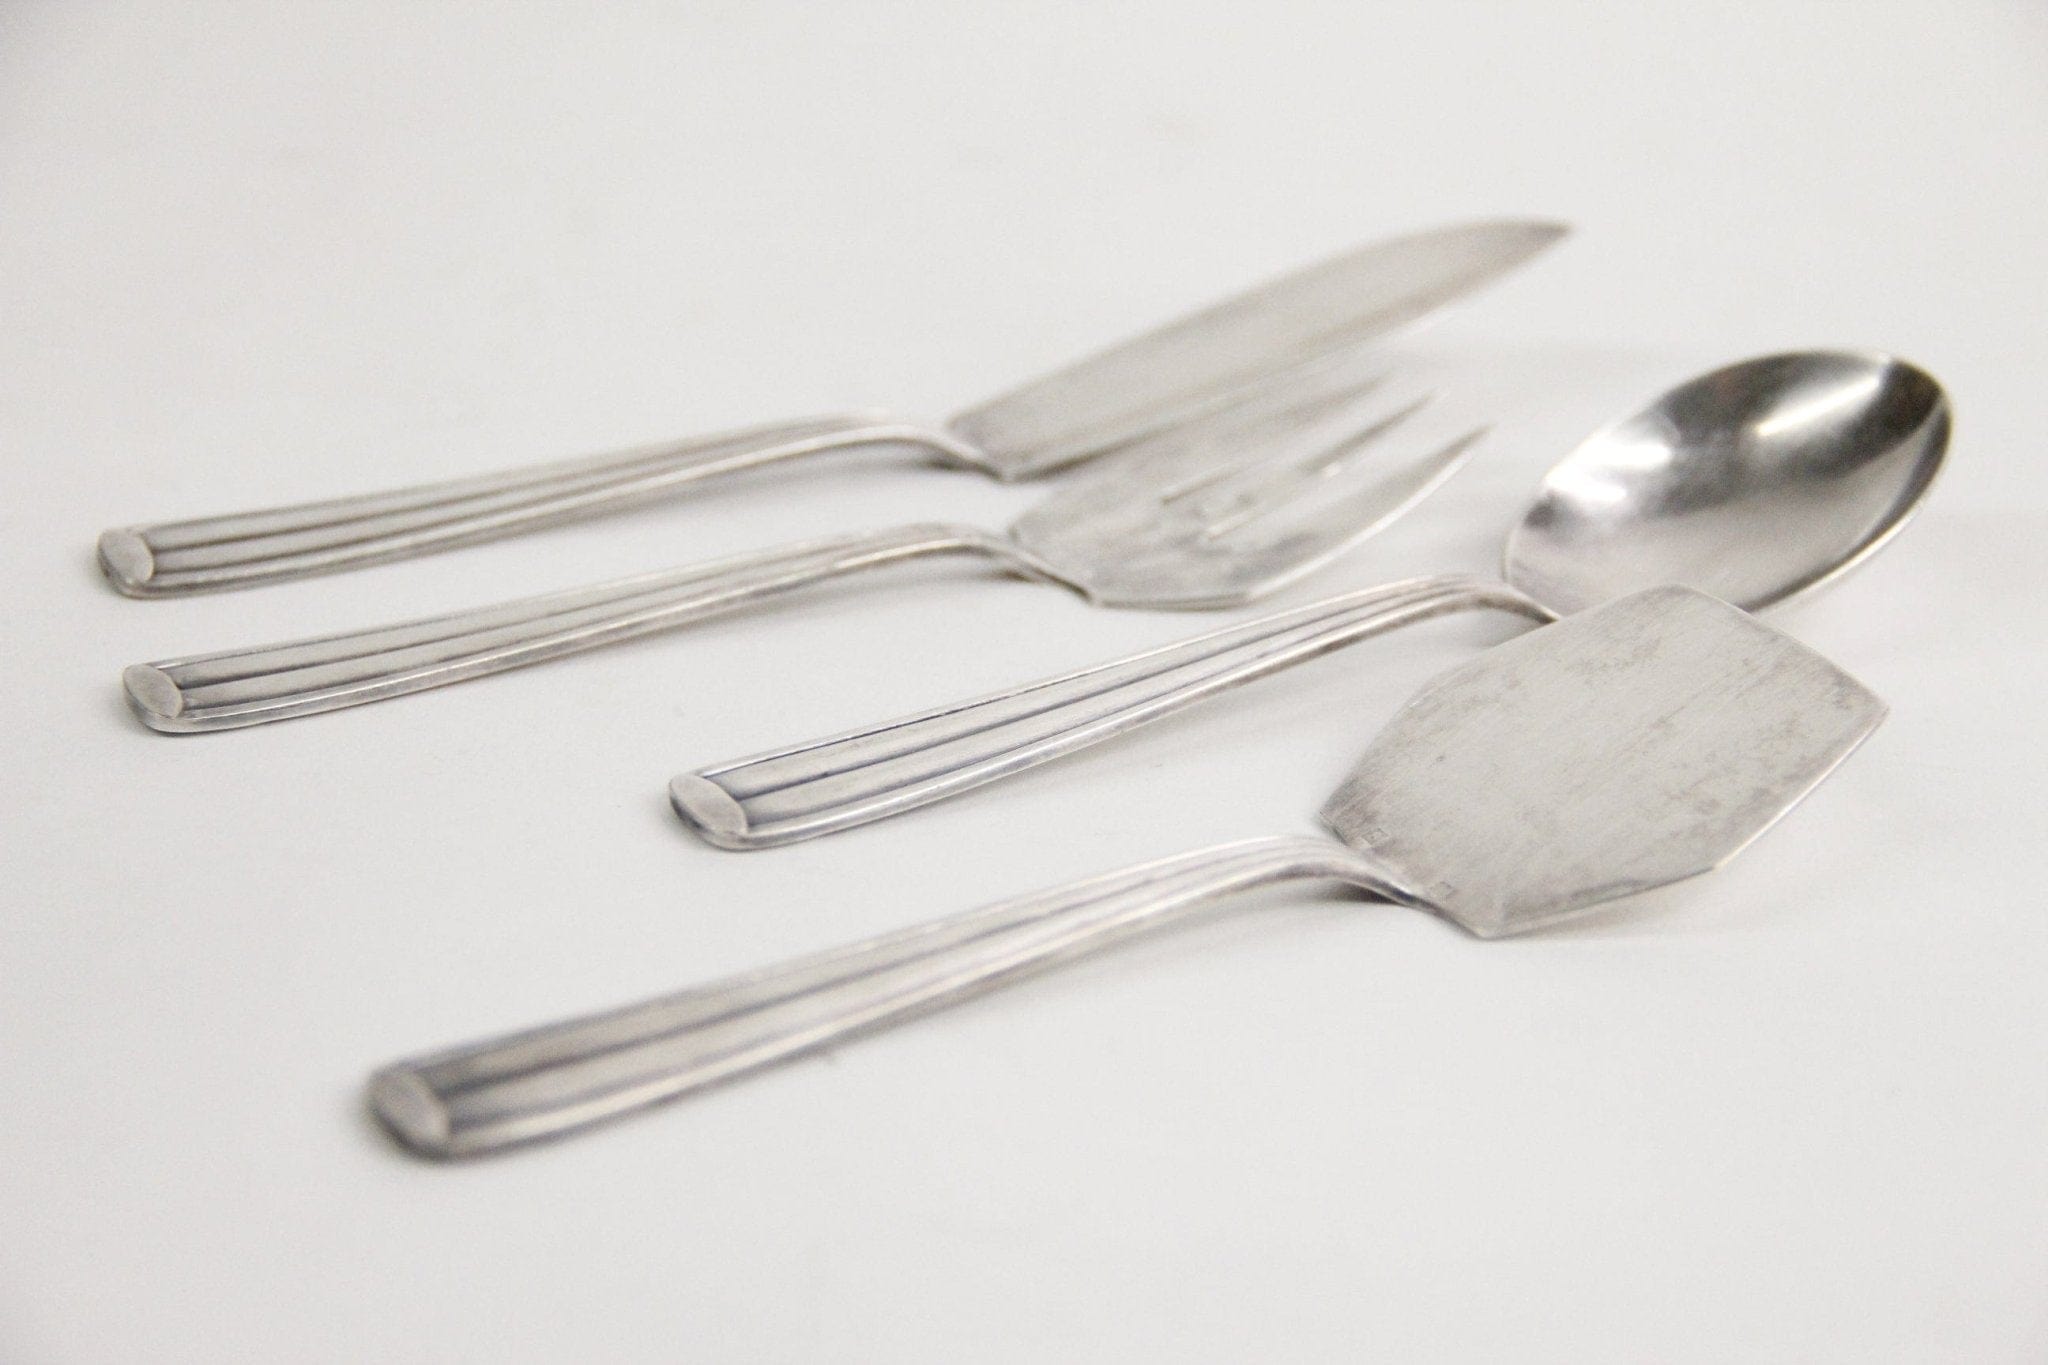 Vintage French Silver Flatware | Hors D'oeuvres Set - Debra Hall Lifestyle